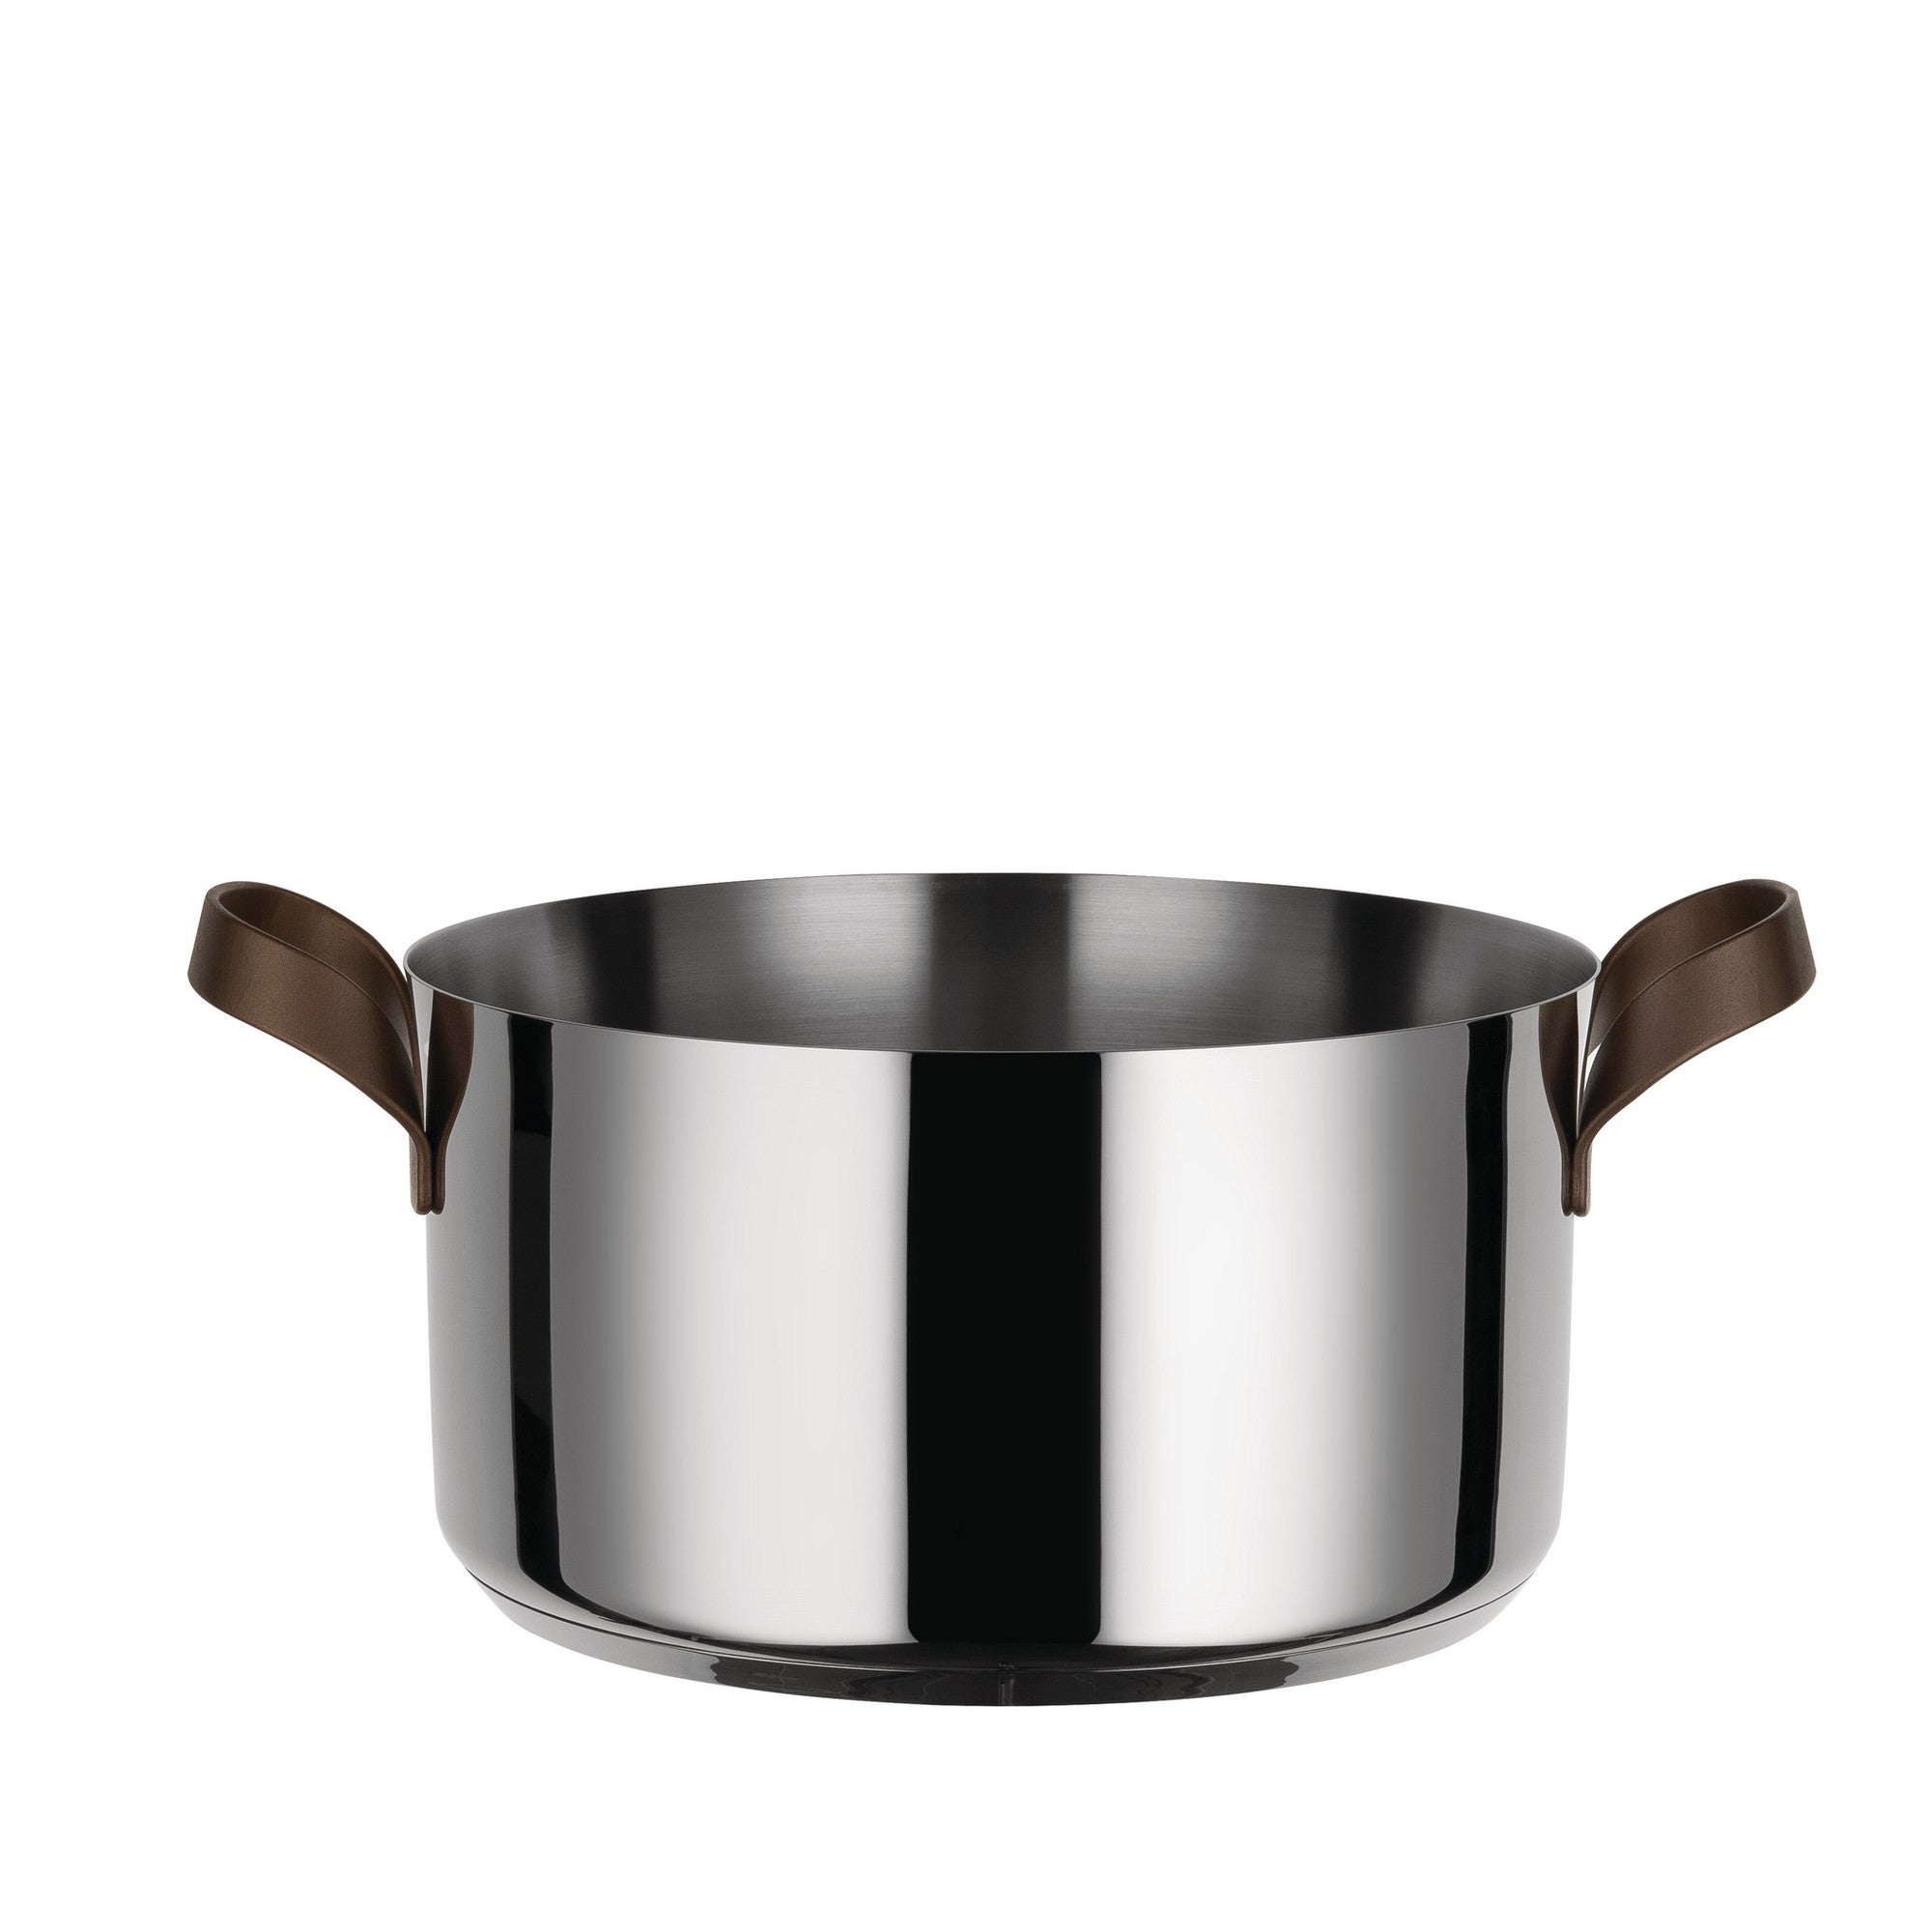 Alessi Edo Saucepan with two handles in 18/10 Stainless Steel, cm 24